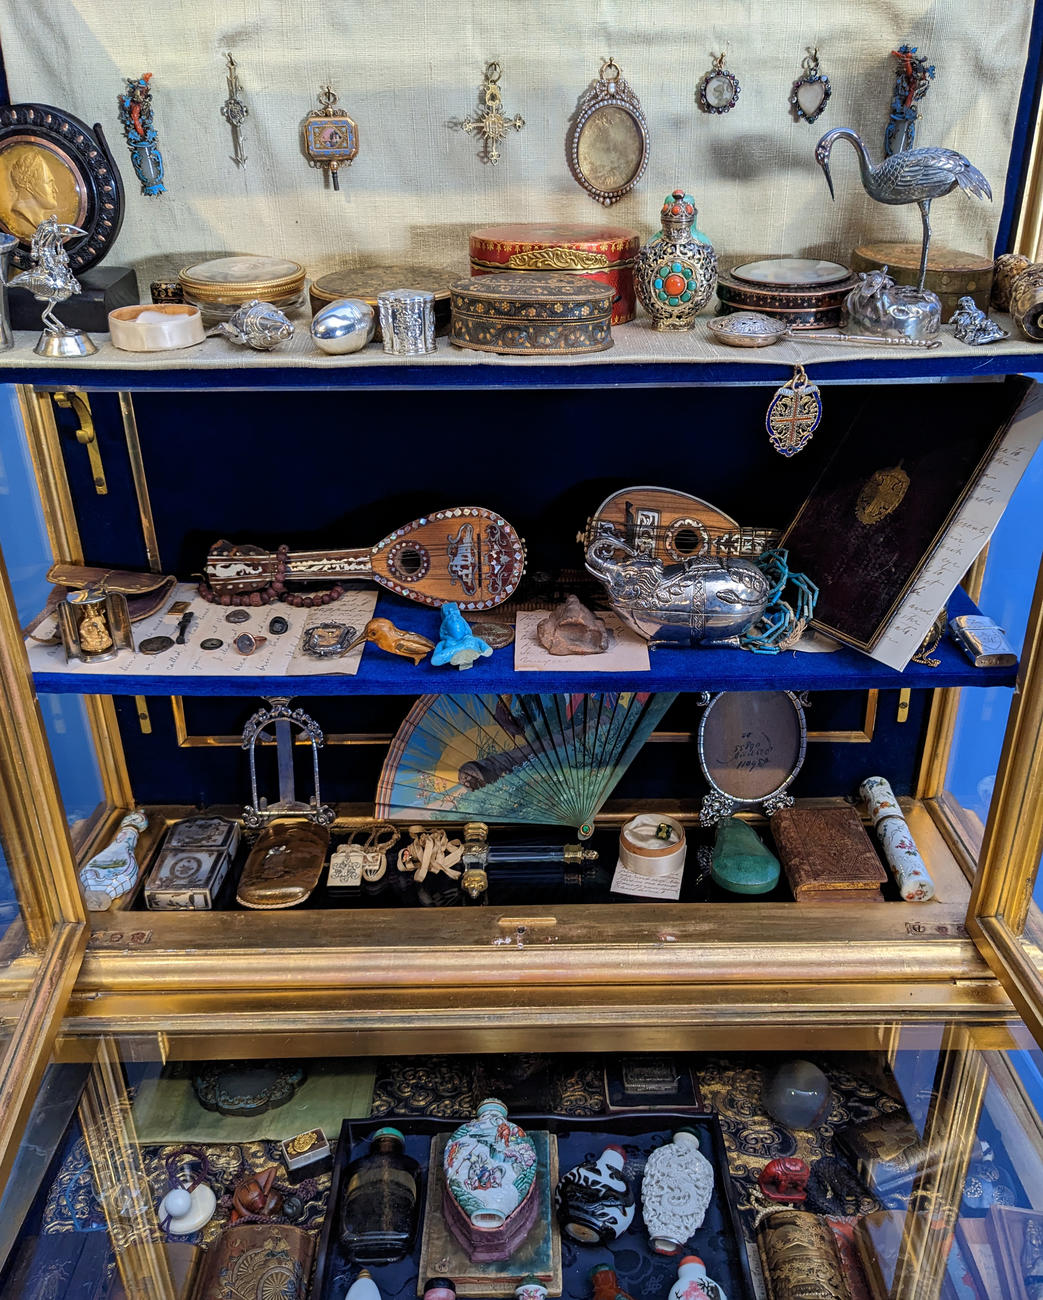 An image of a gilt vitrine from the Gardner Museum showing four levels of small objects displayed in its interior after the objects had been conserved.